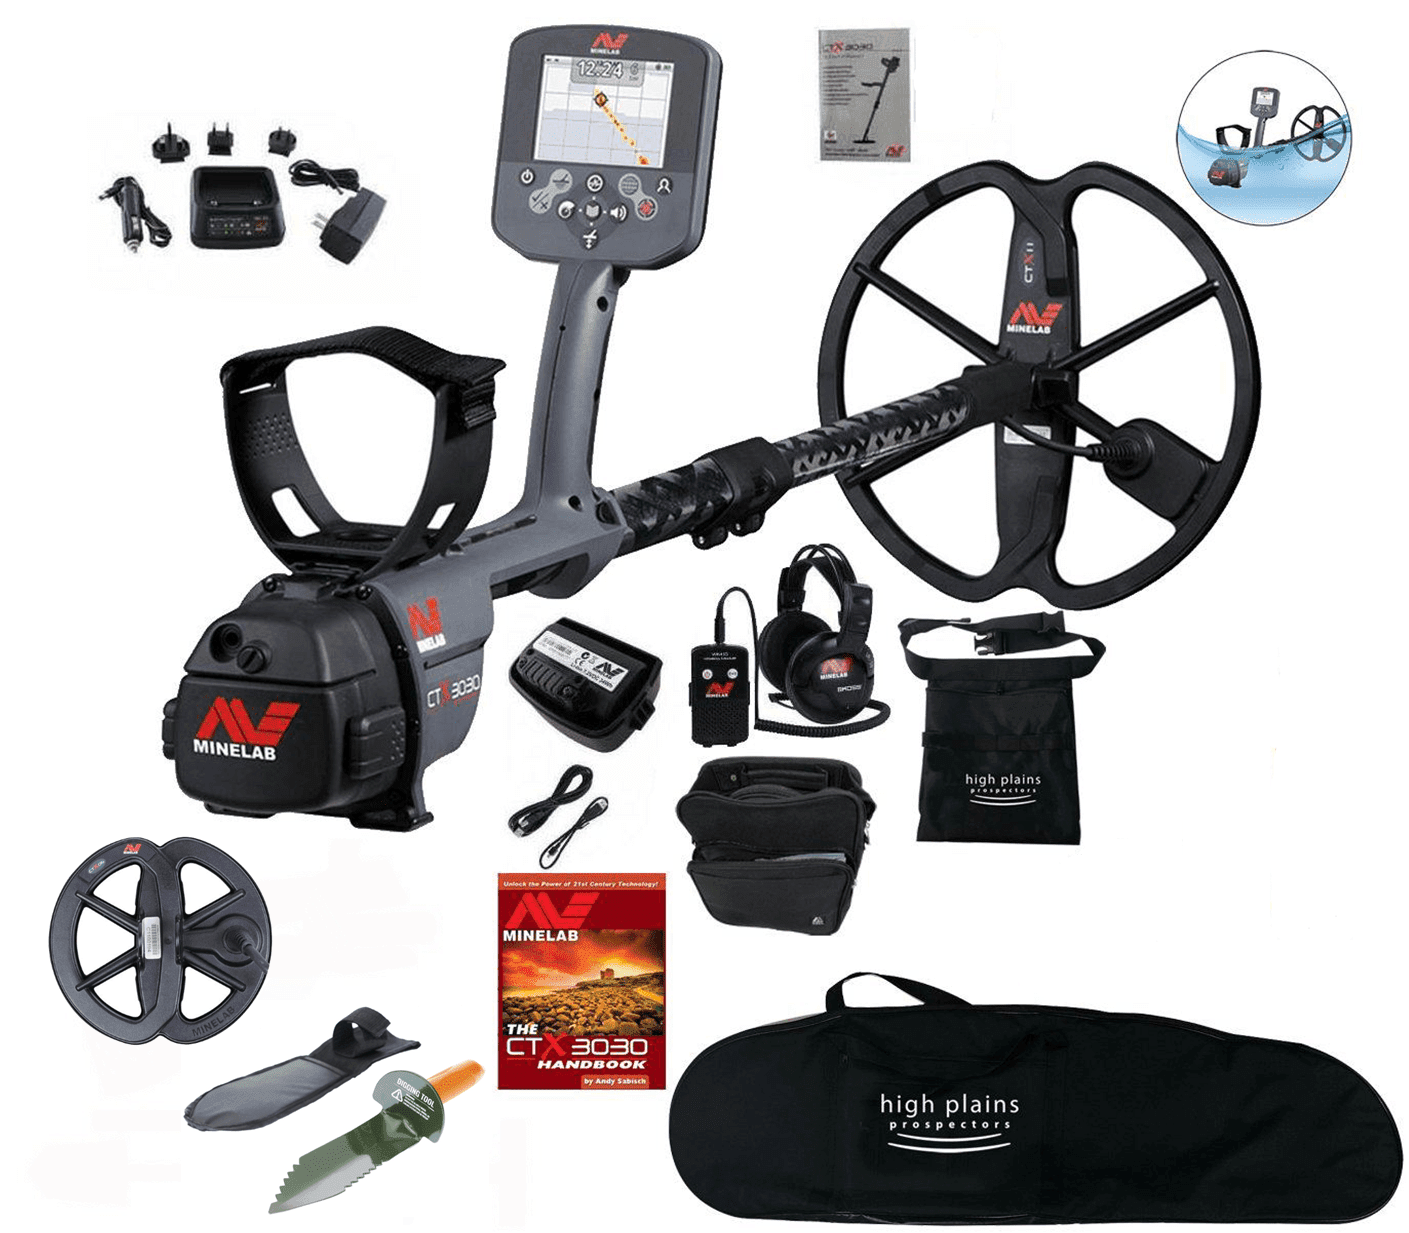 Minelab CTX 3030 Waterproof Metal Detector with 6" Smart Coil and FREE High Plains Gear